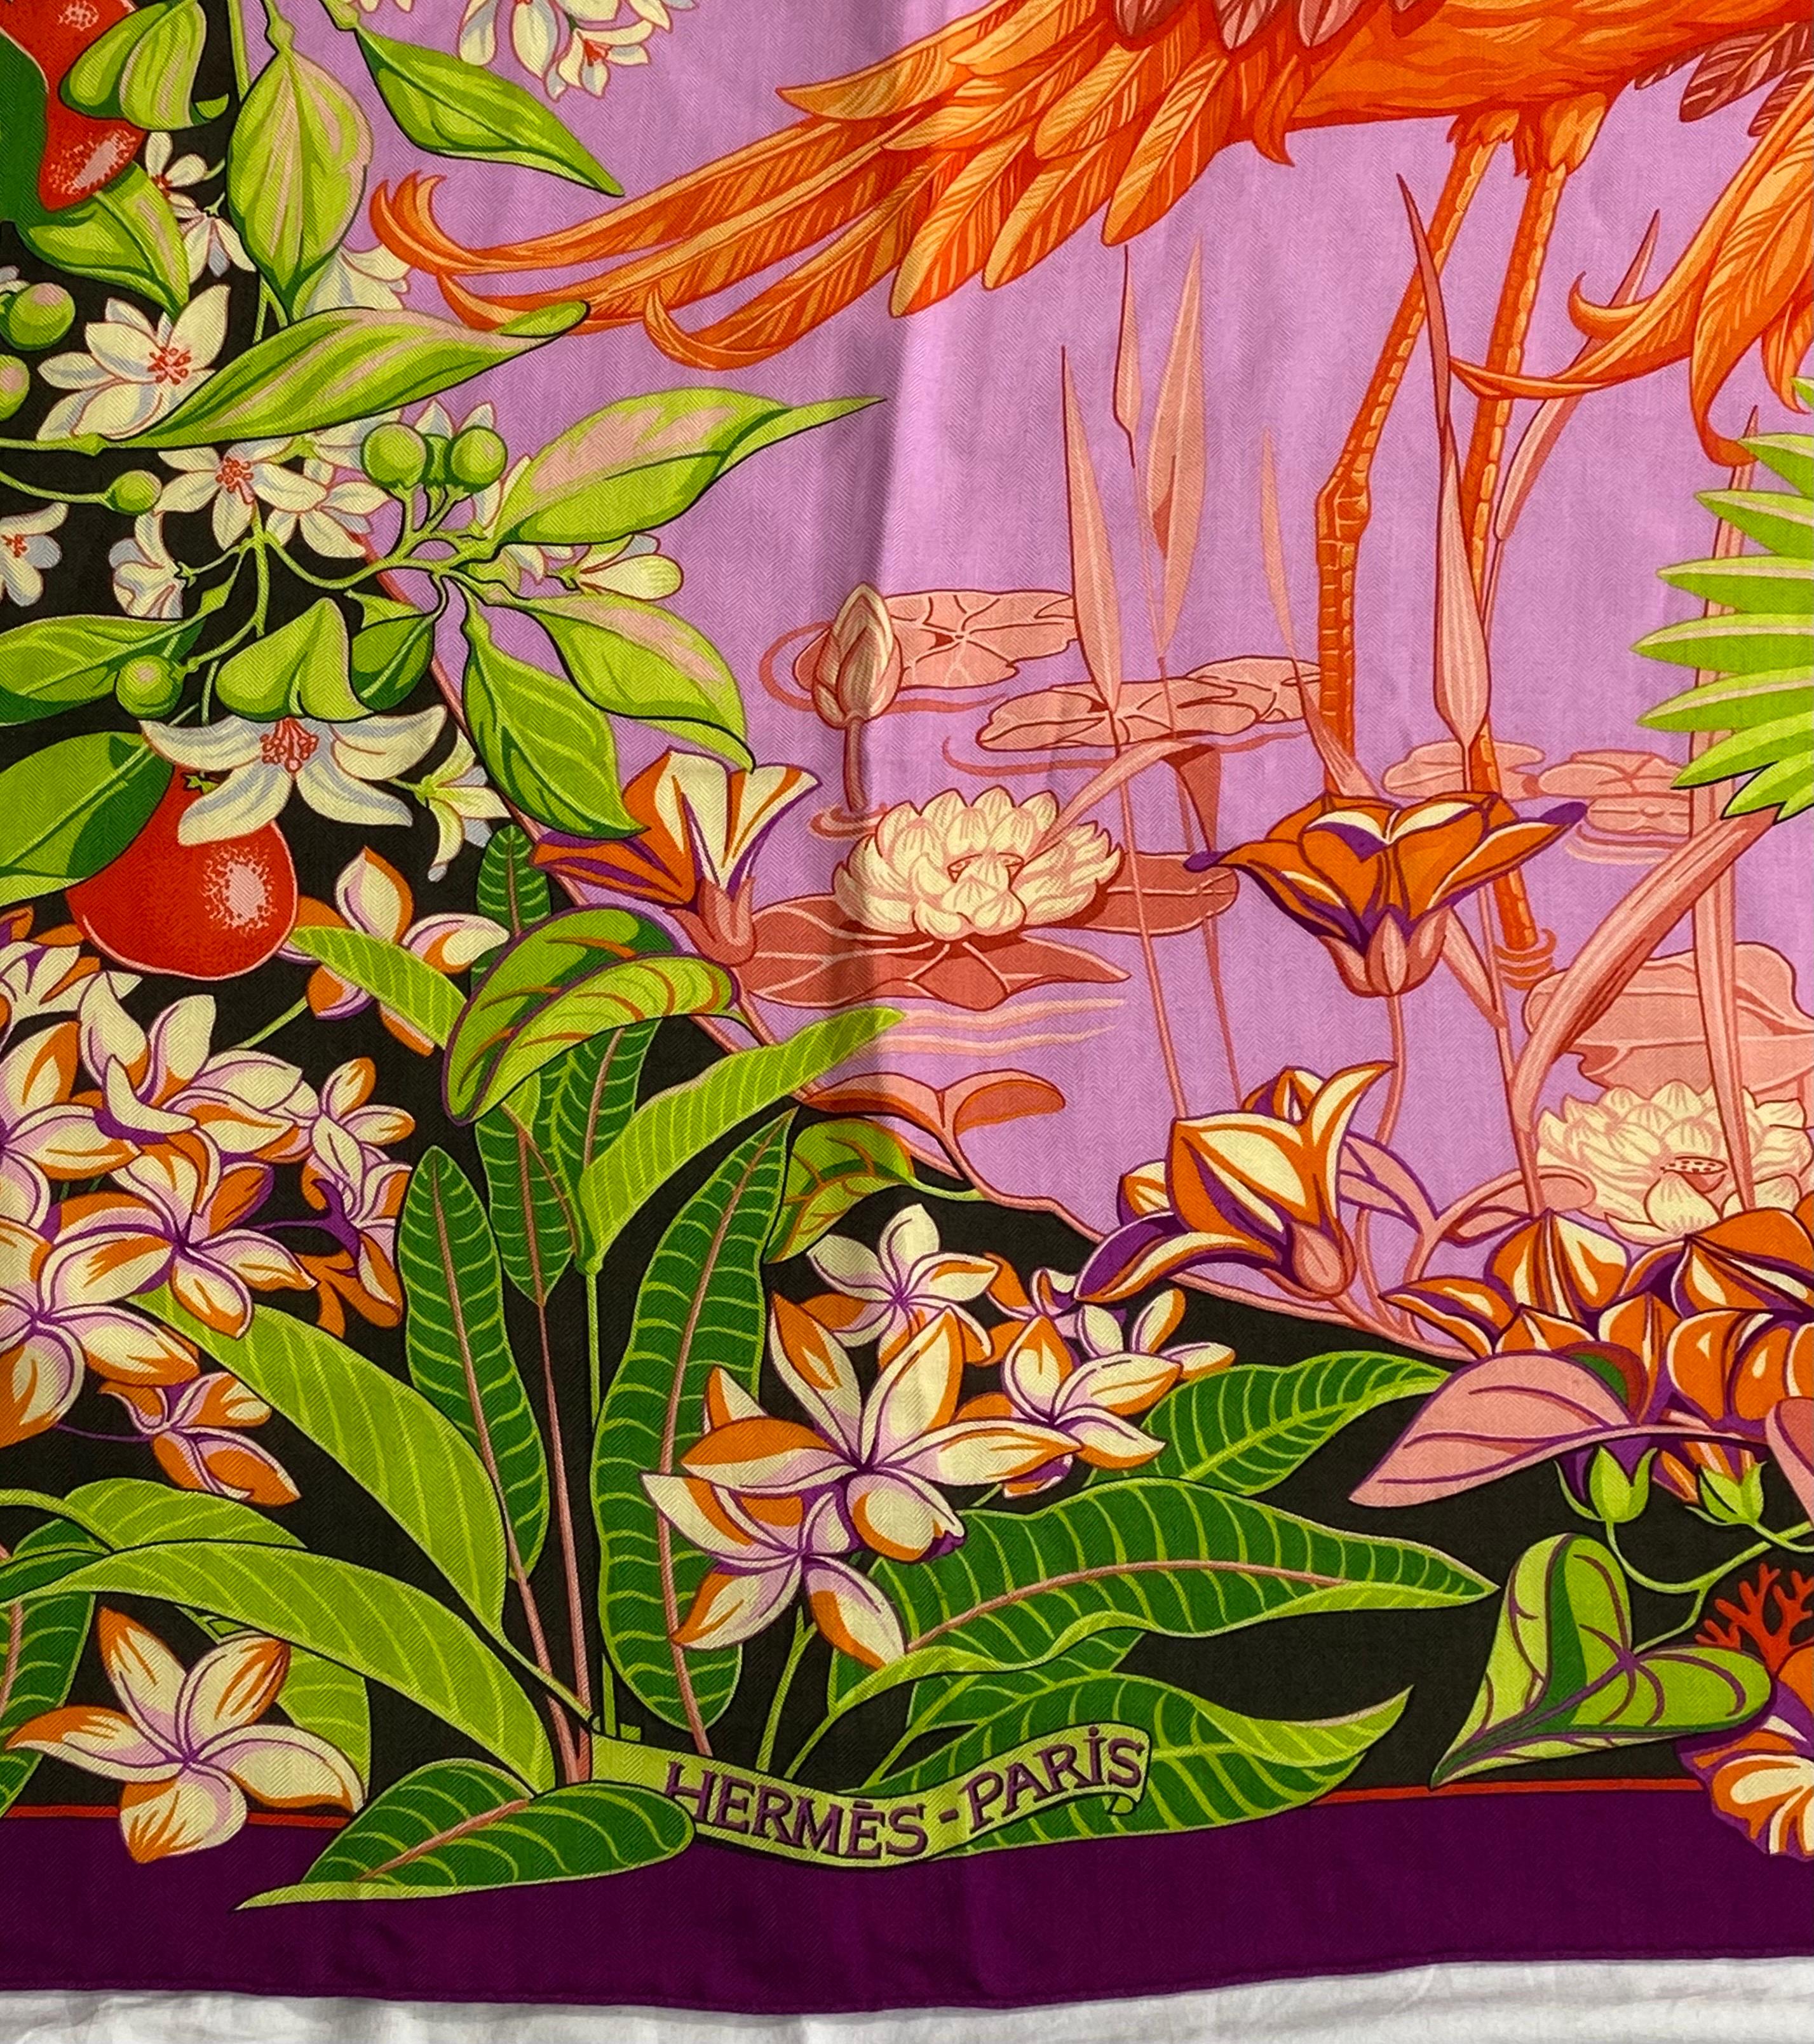 Hermes “FLAMINGO PARTY” multi color cashmere 140 cm large shawl. The largest of the Hermès scarf line, the Hermès 140cm shawl measures approximately 55 inches on each side and is made from the softest silk and cashmere. This particular one has